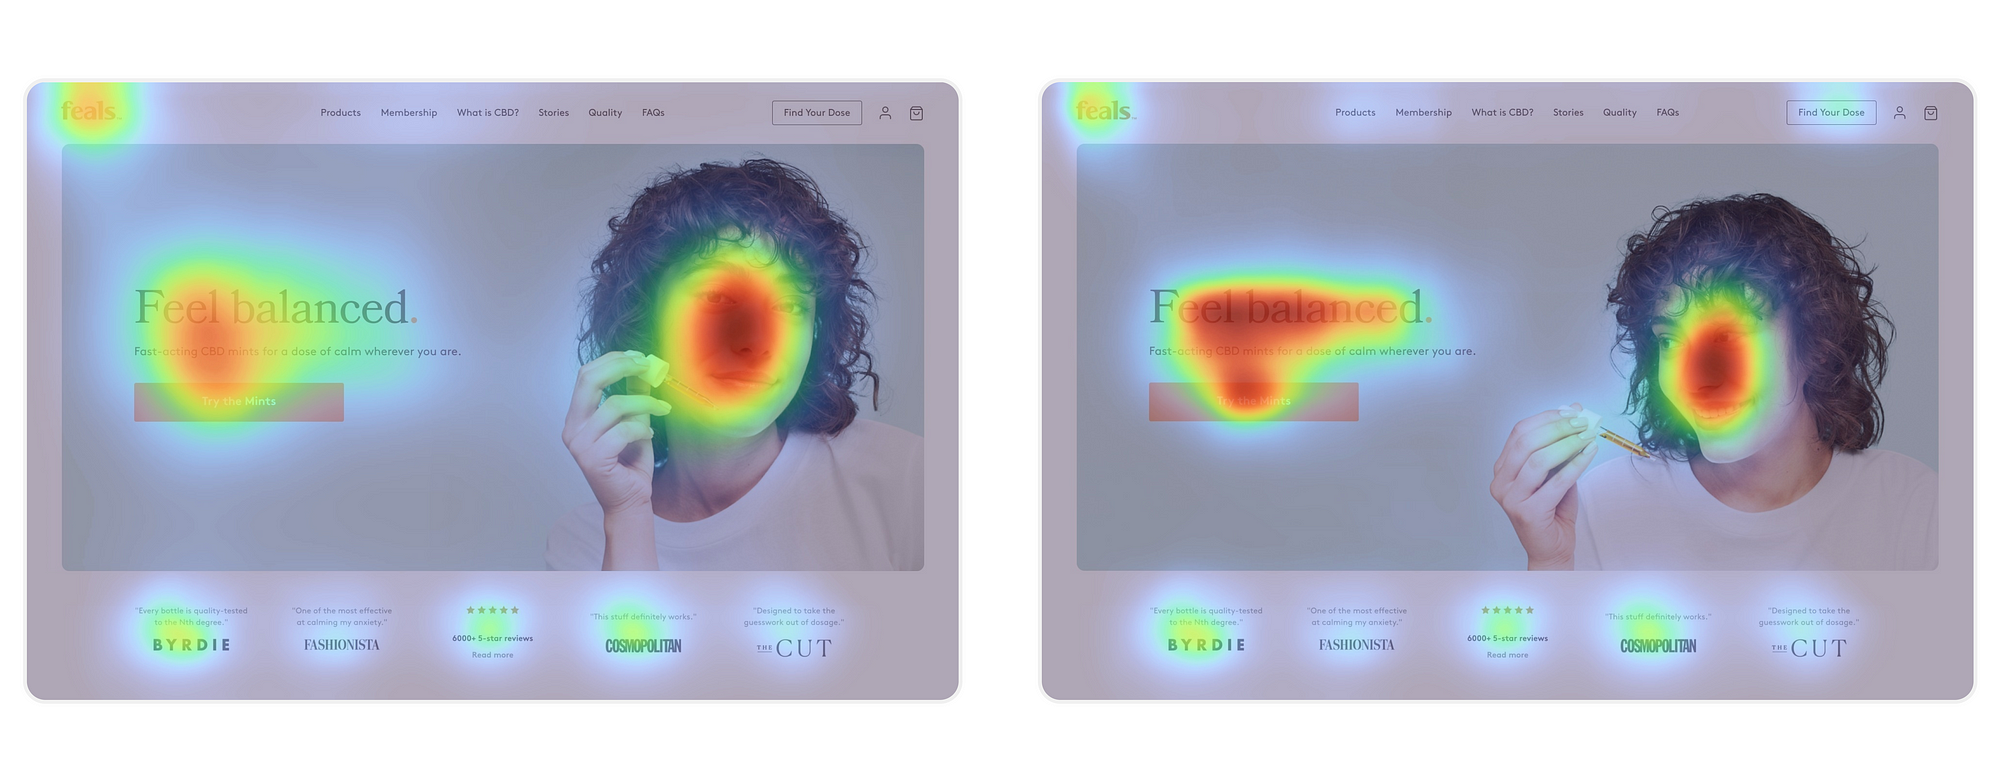 Side by side comparison of 2 heatmaps, showing the winner on the right.